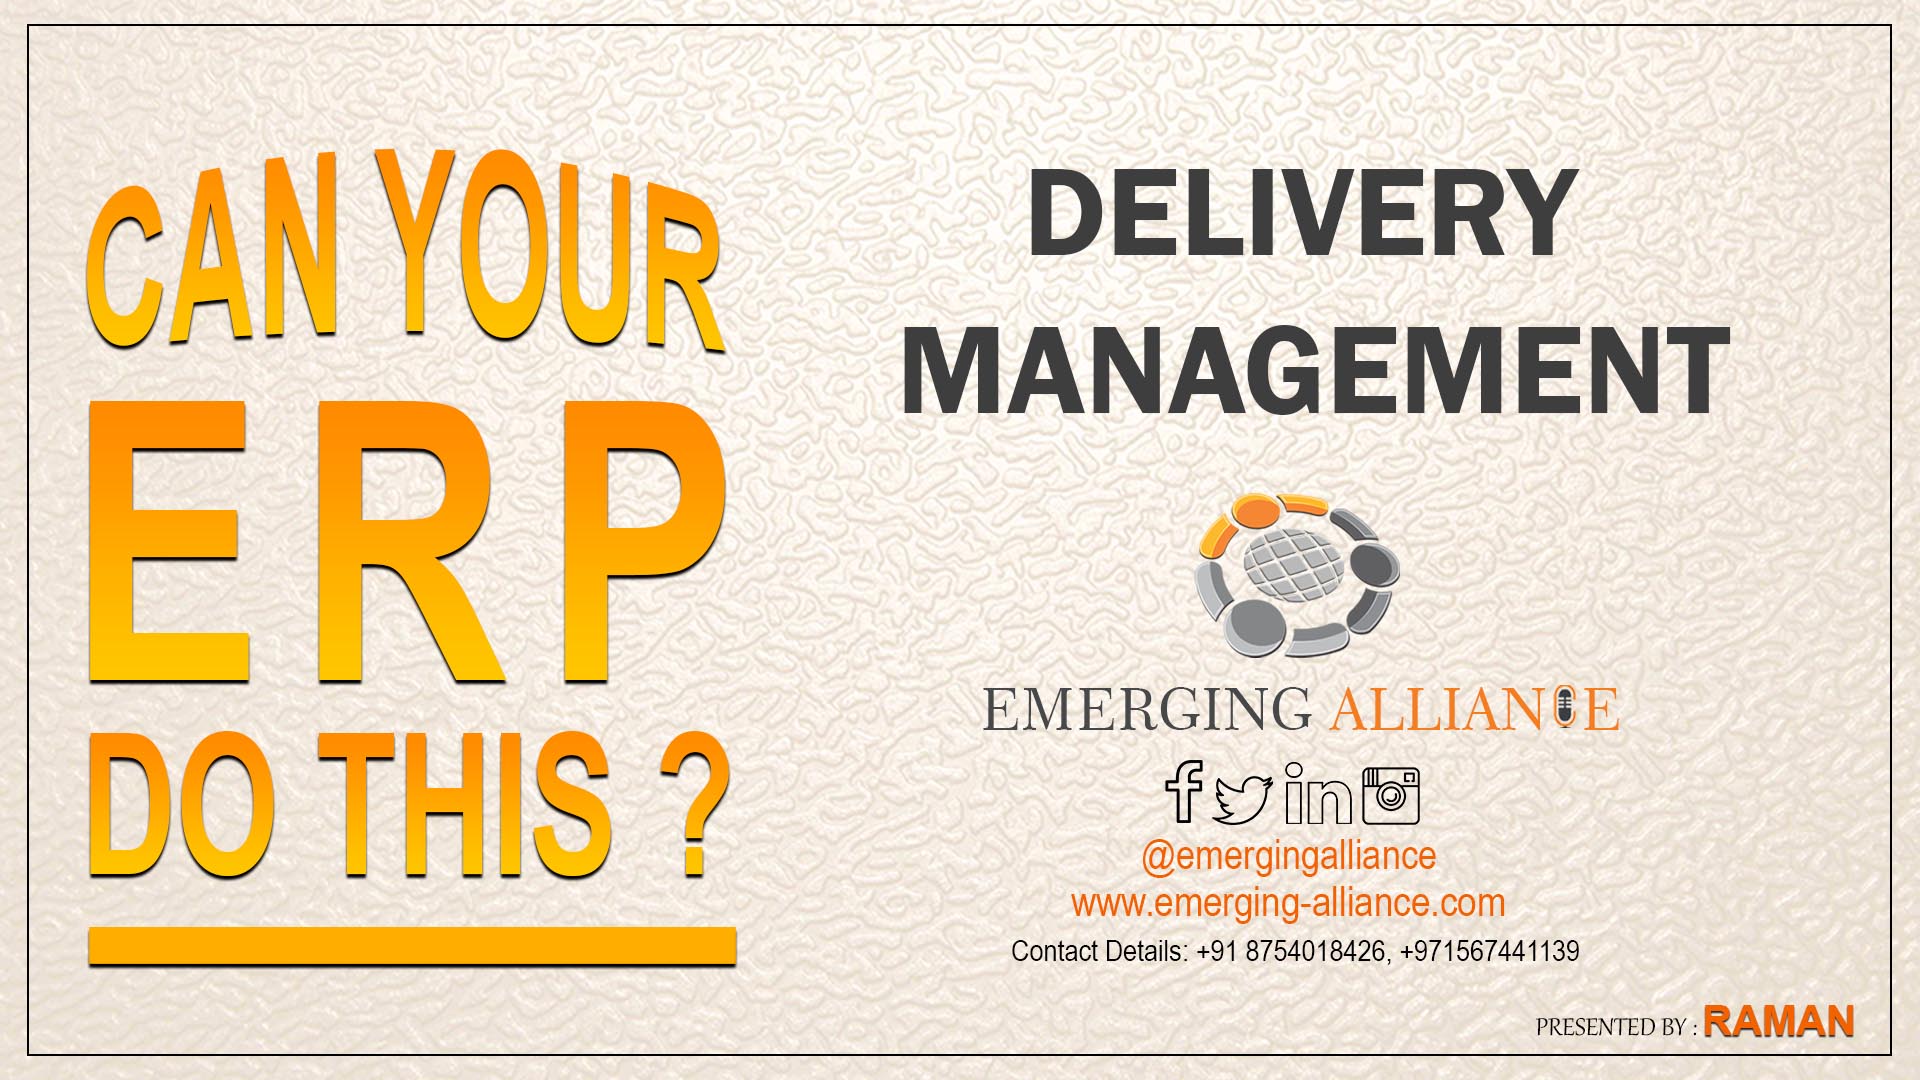 Can your ERP do delivery management